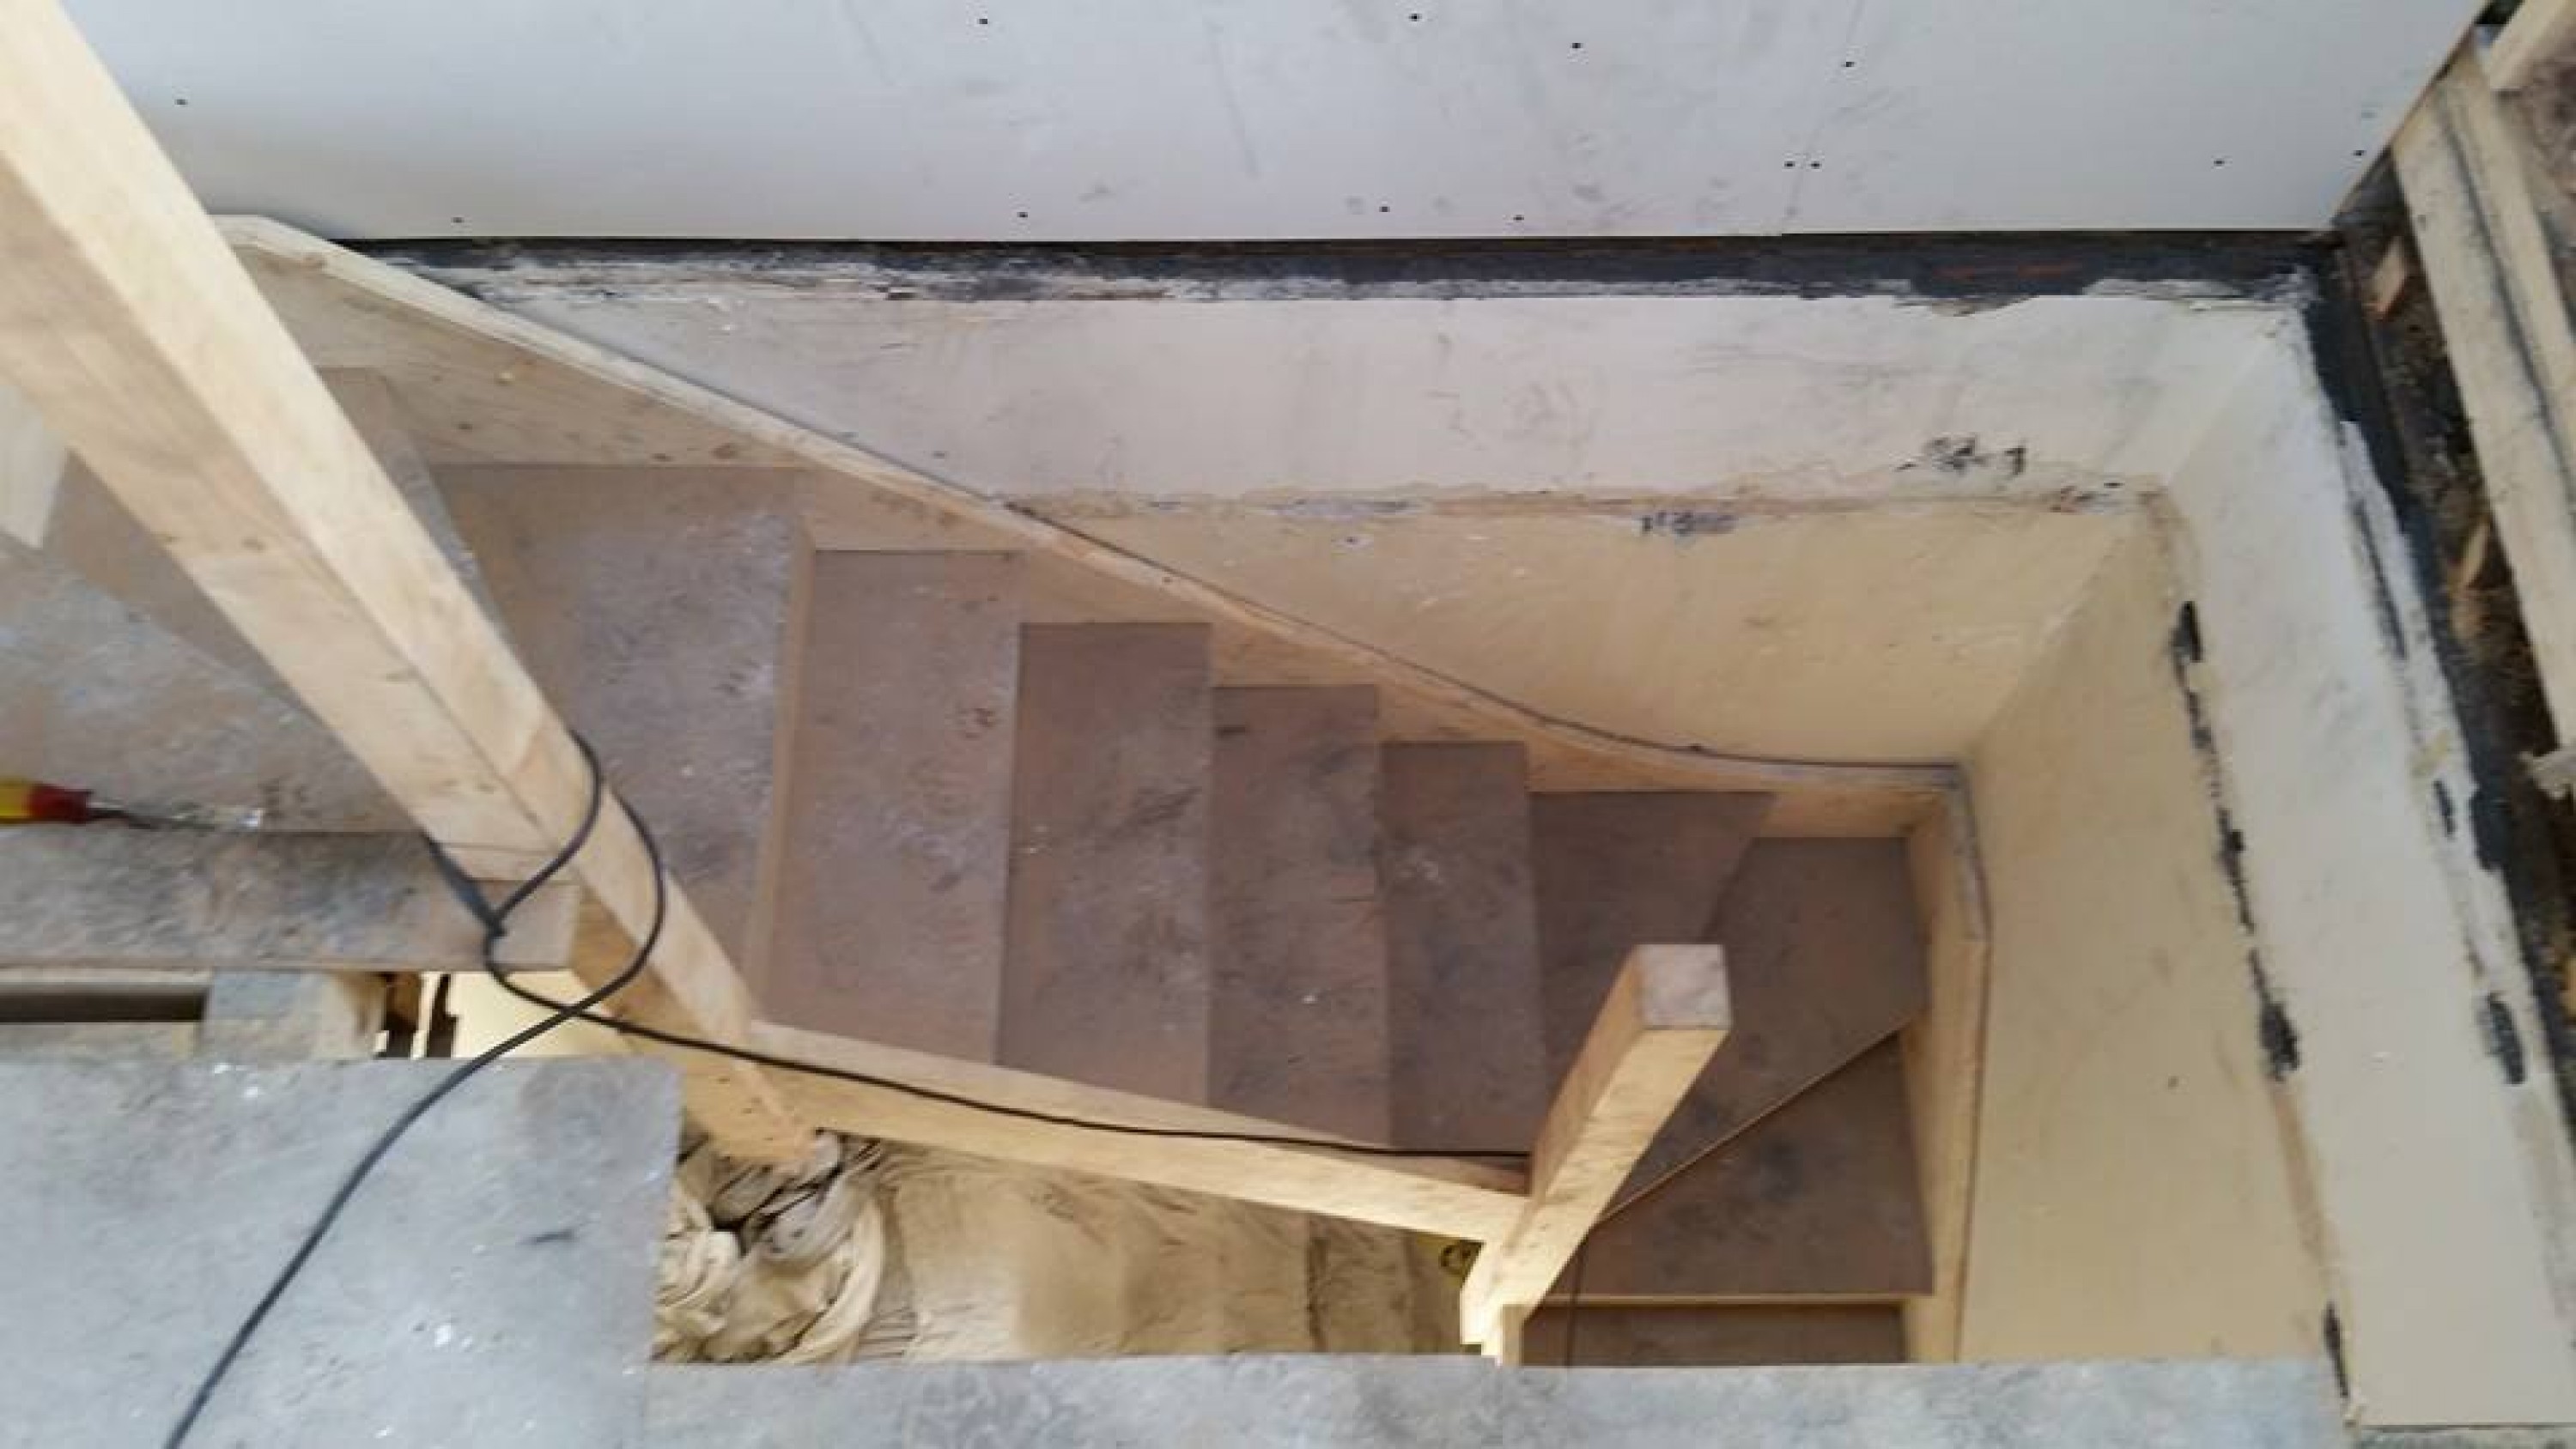 New stairs in place